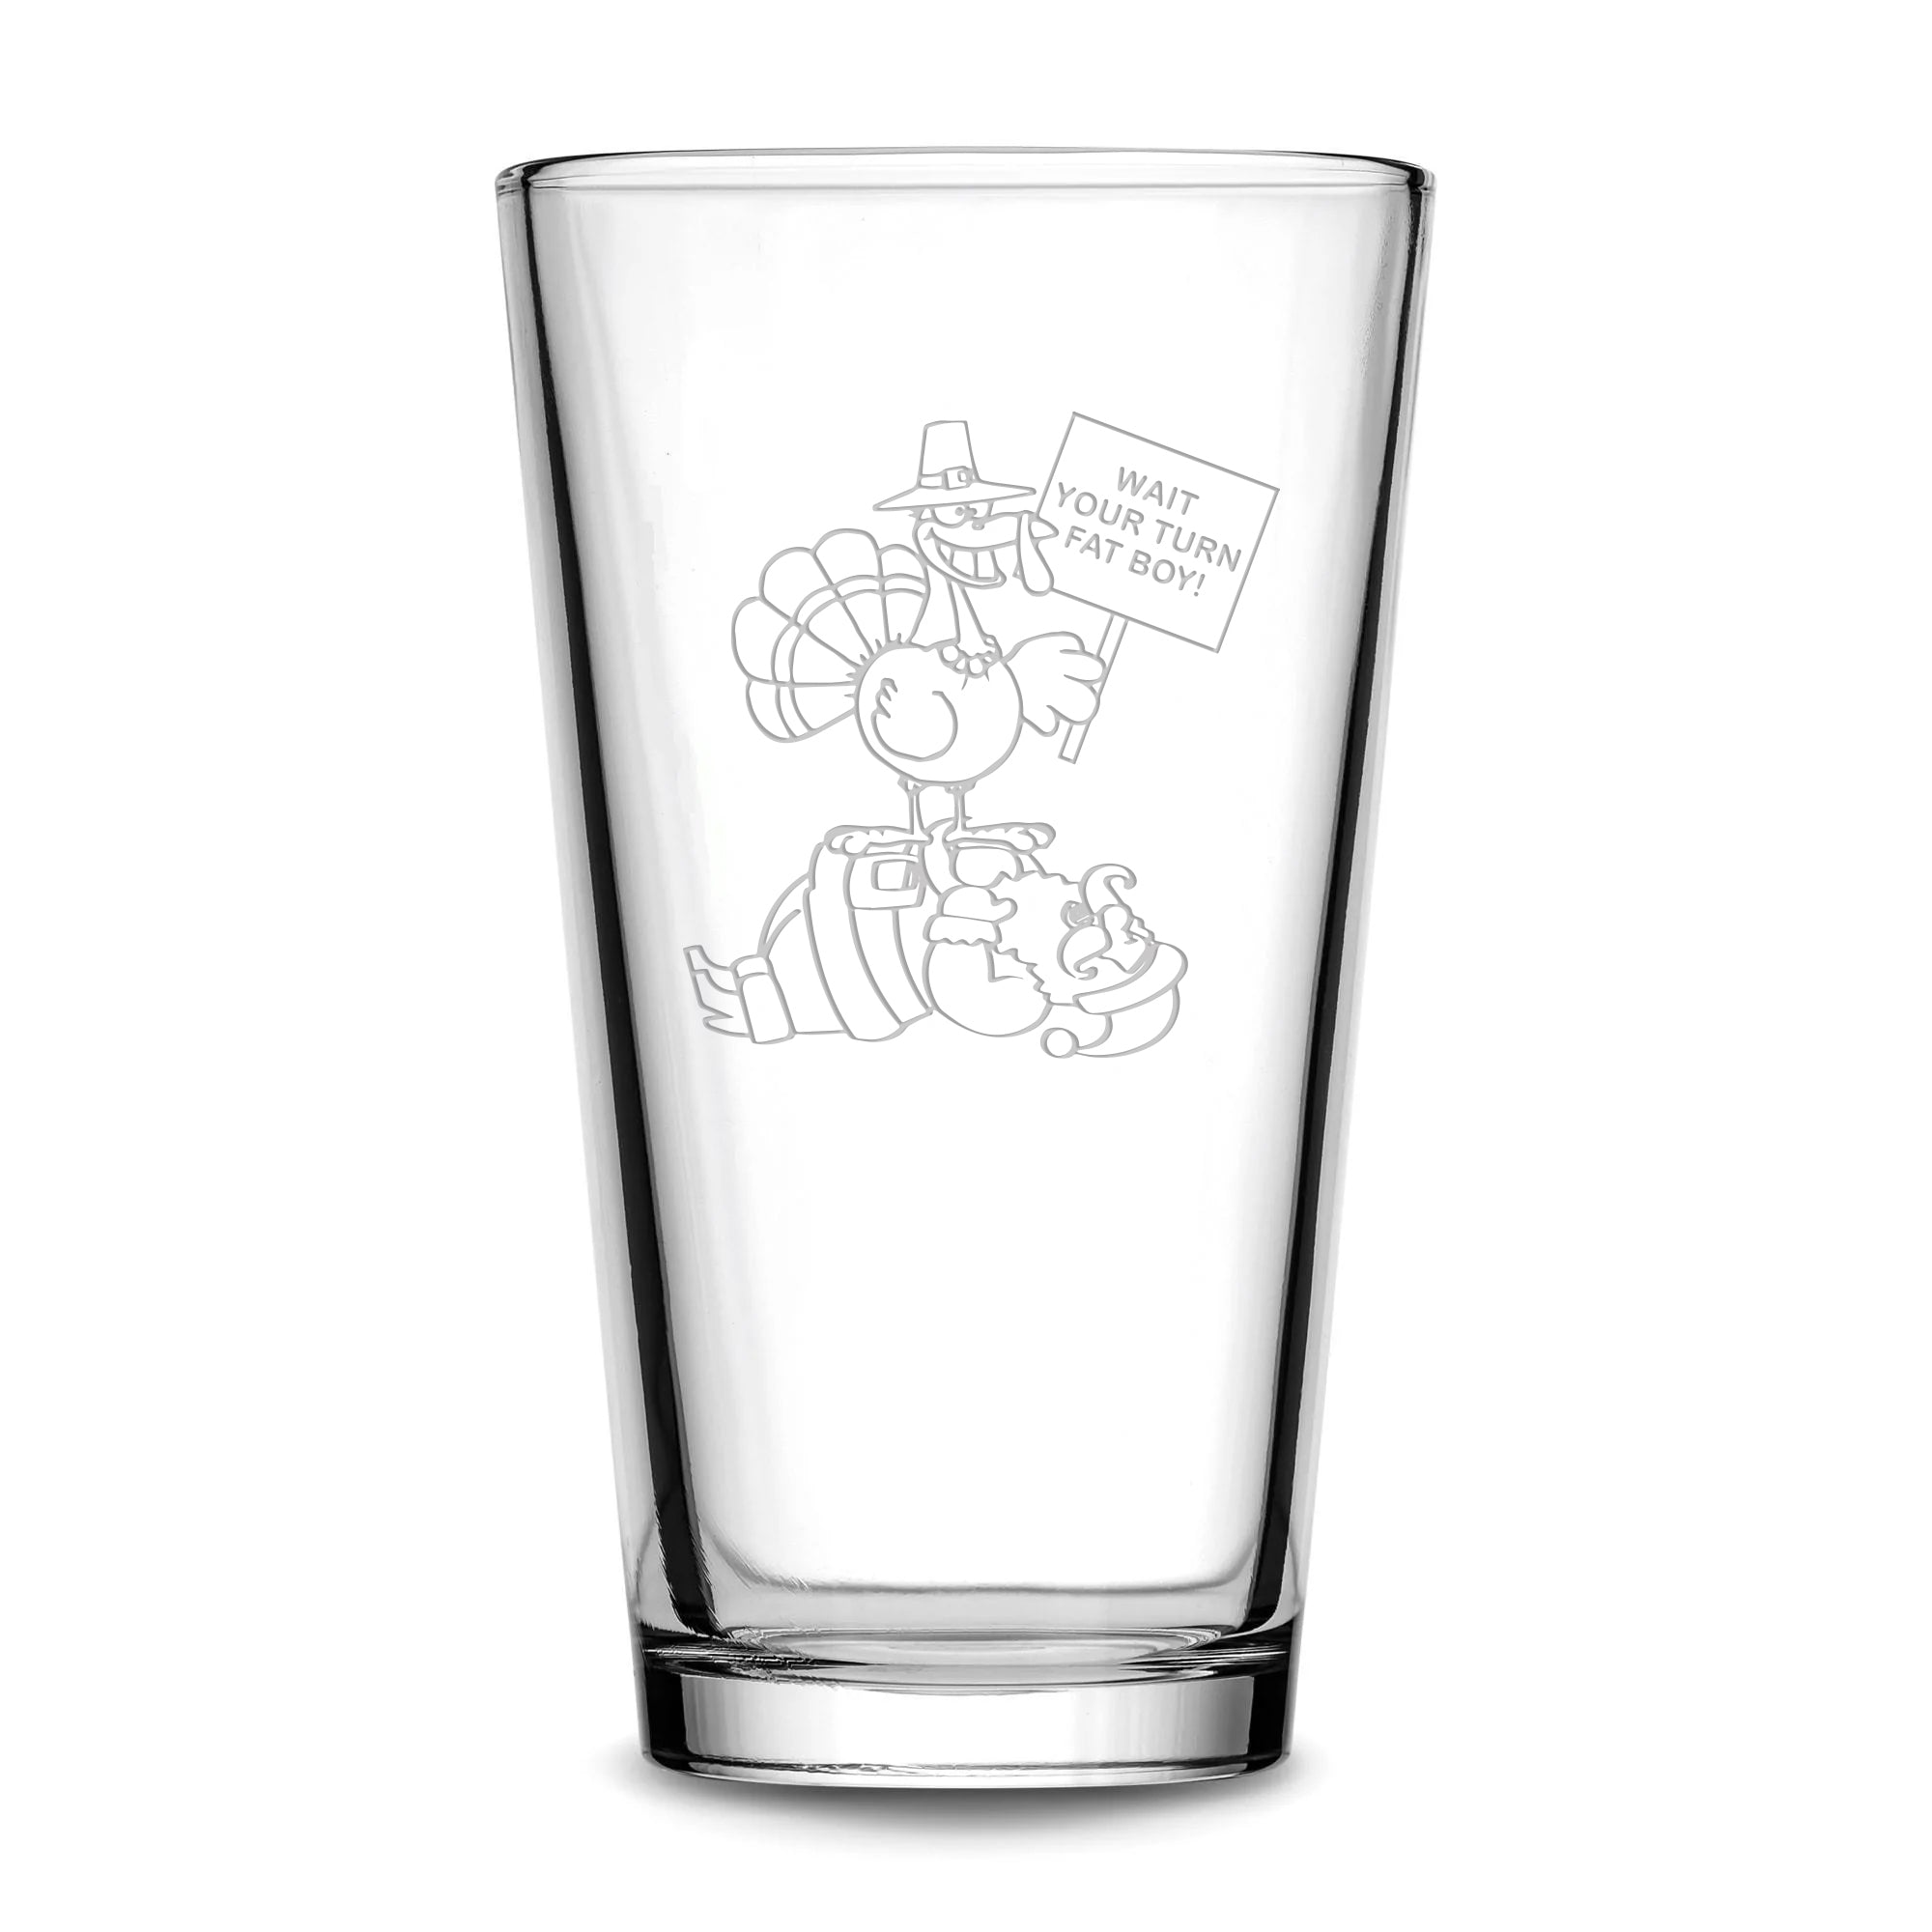 Premium Wait Your Turn, Pint Glass, 16oz, Laser Etched or Hand Etched